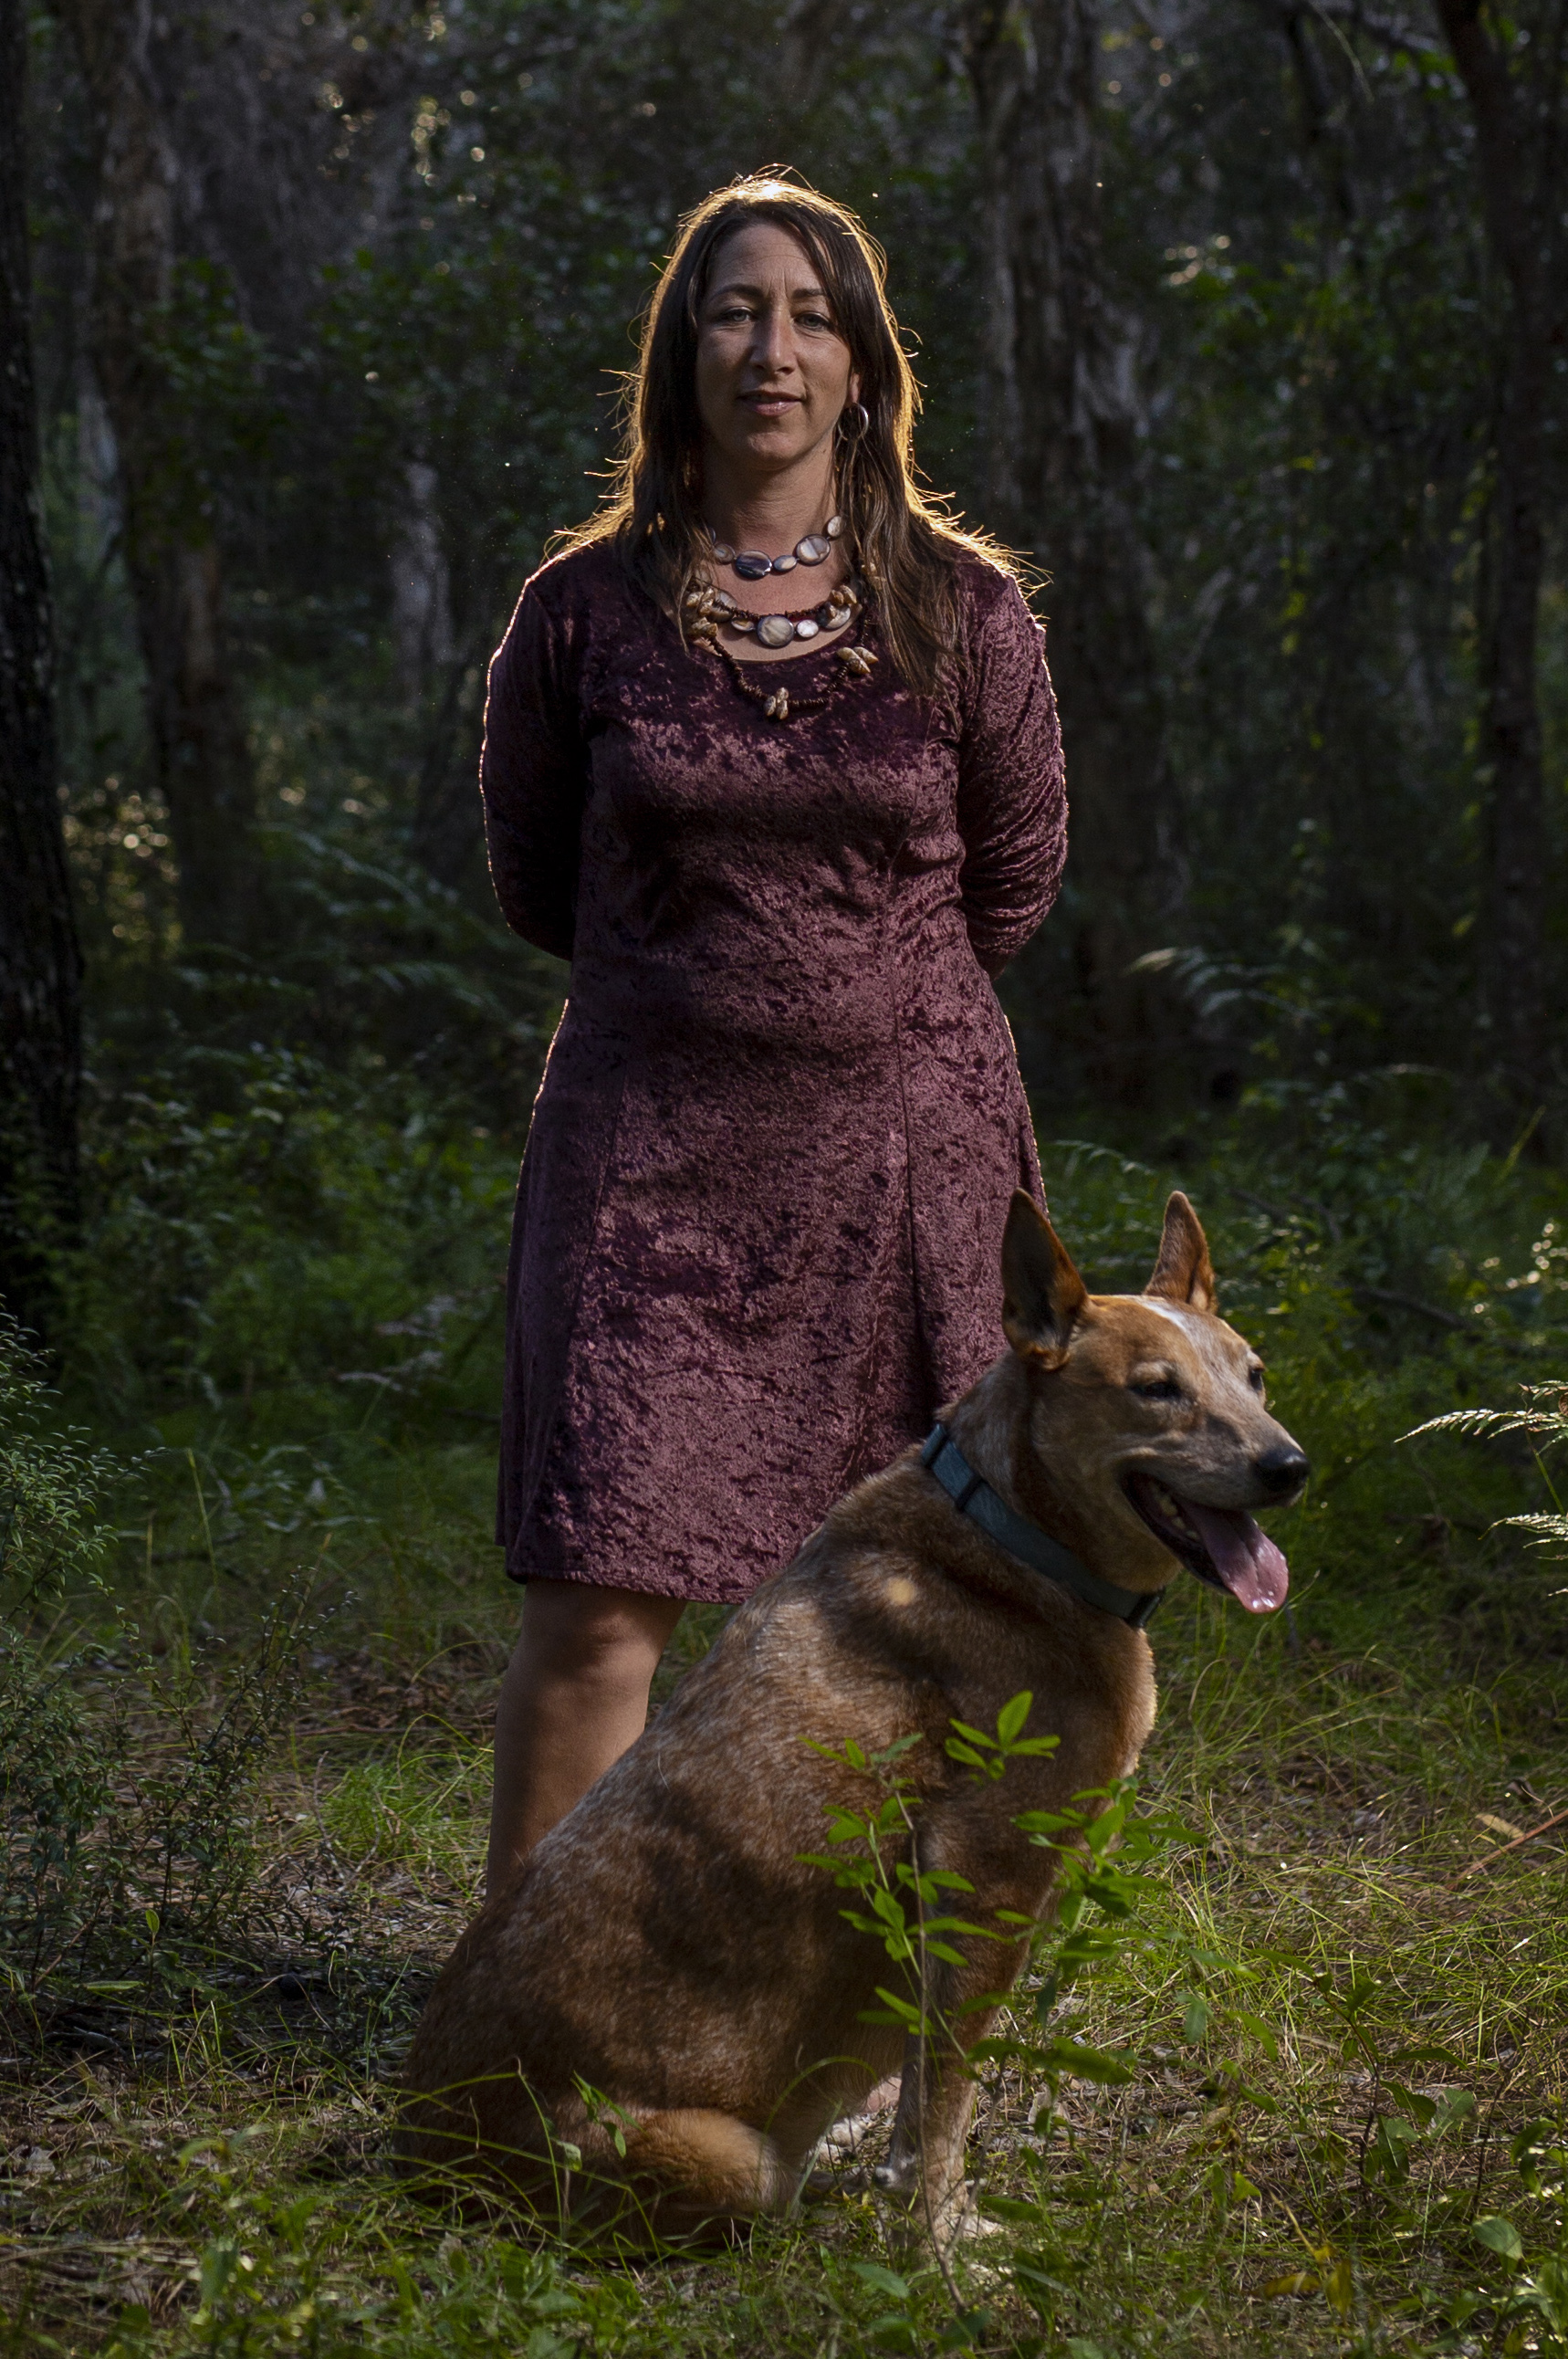 A long-haired brunette Aboriginal woman stands with her arms behind her back in dense forest, a dog sitting at her feet